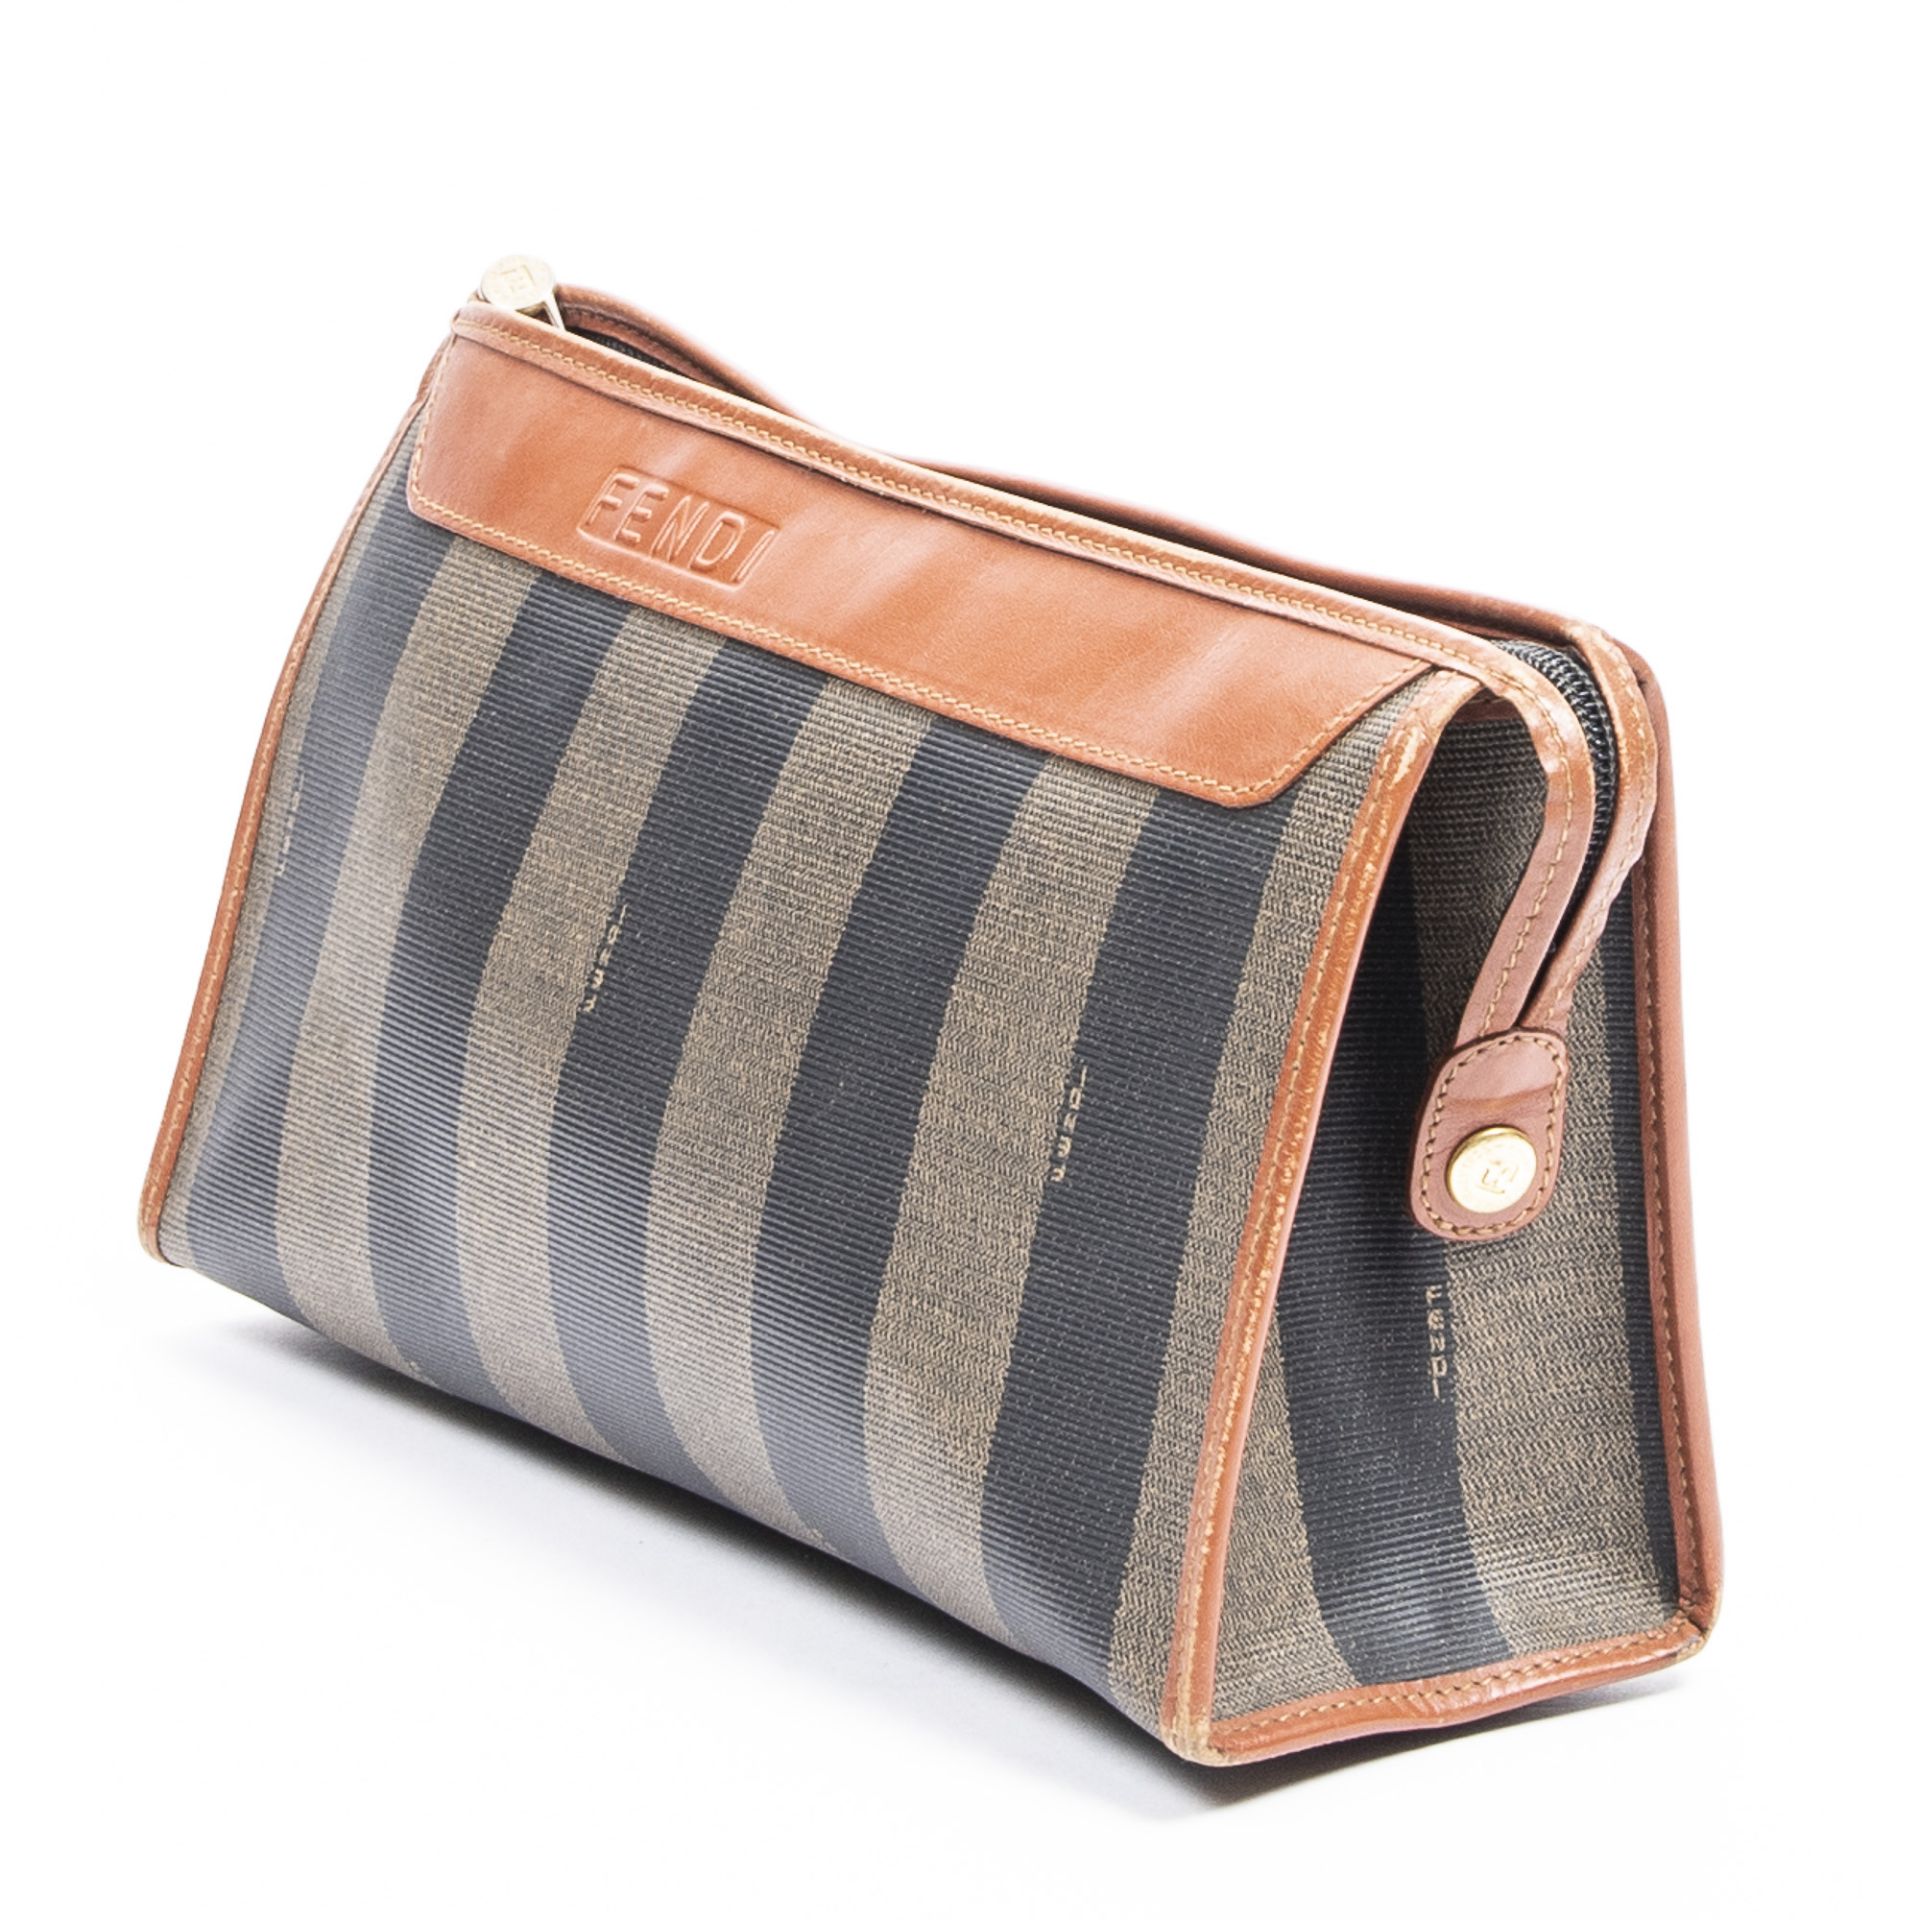 RRP £475.00 Lot To Contain 1 Fendi Coated Canvas Vintage Clutch Handbag In Brown/Black - 29*11* - Image 2 of 3